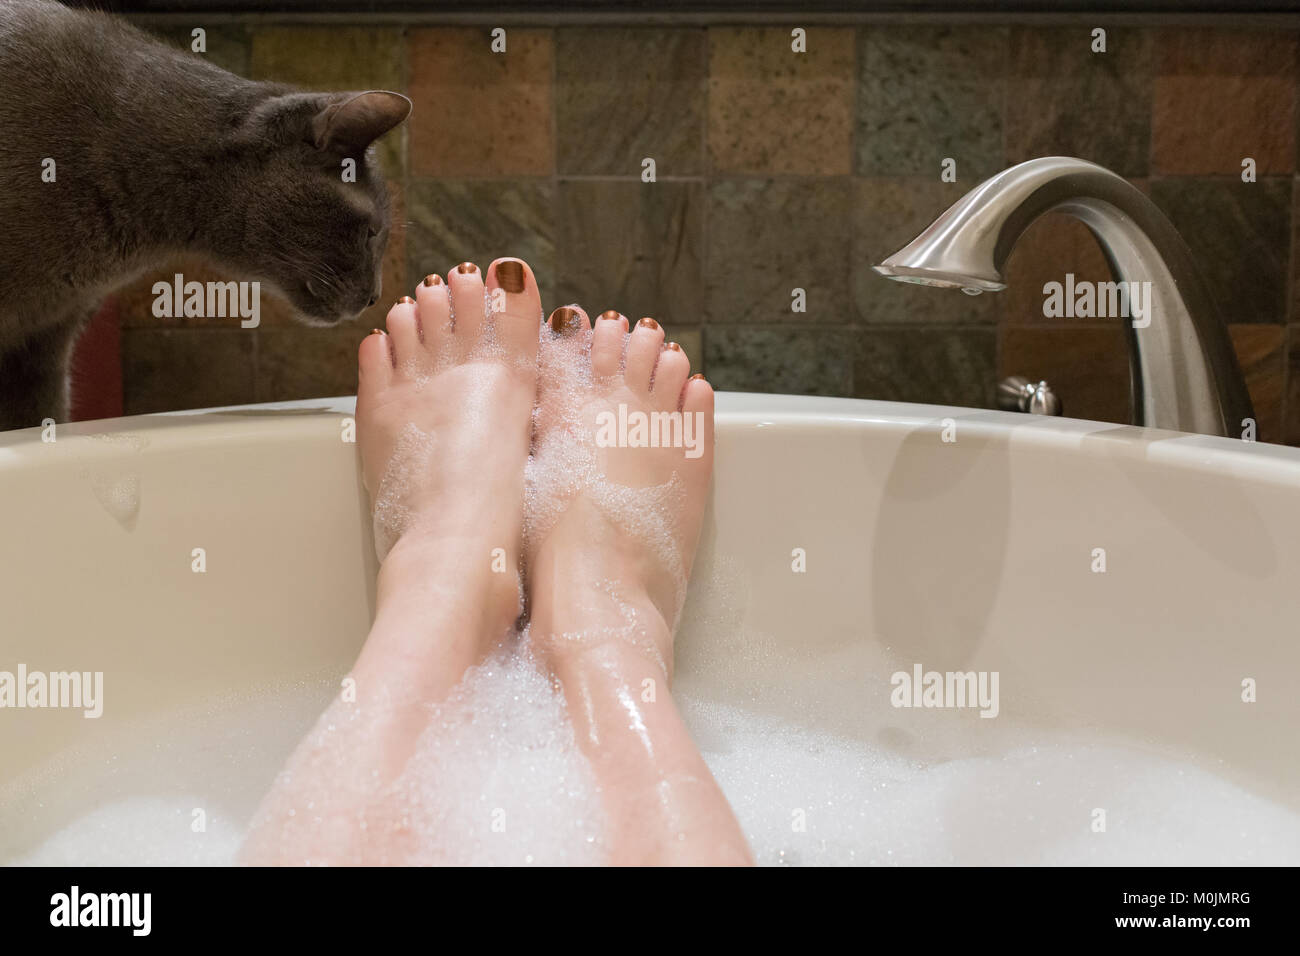 A grey cat checks out the bubbles on a woman's foot as she soaks in a bubble bath Stock Photo